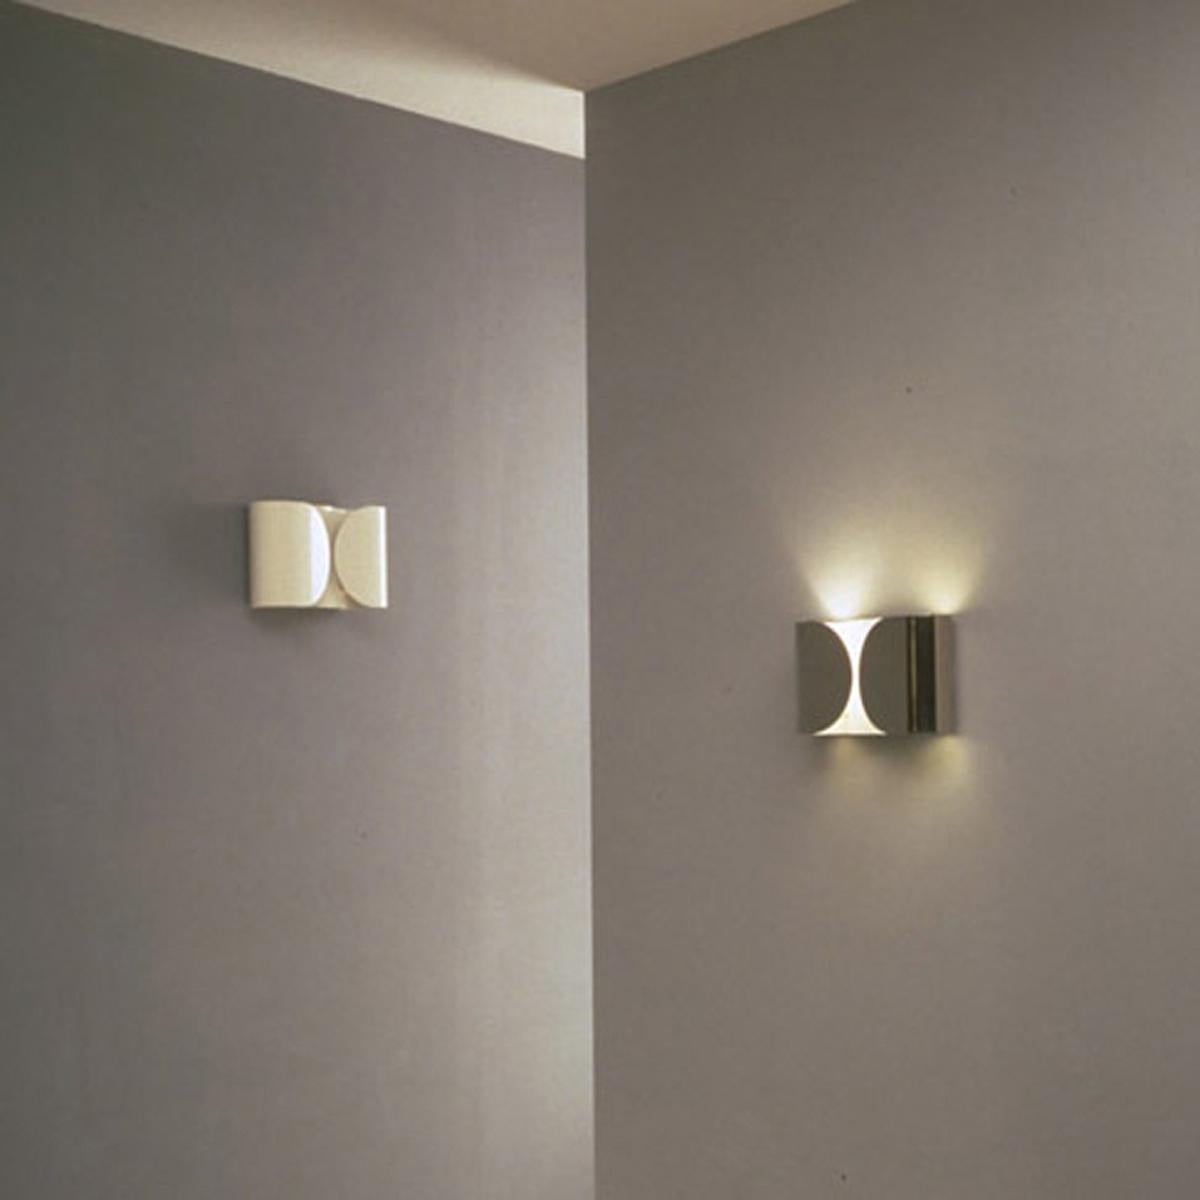 Flos Foglio - Wall Sconce in Gold by Tobia Scarpa

Resembling a shirt cuff, the contemporary Foglio wall lamp from design master Tobia Scarpa is a mixture of timeless and contemporary design. The lamp’s body is formed by power-painted pressed